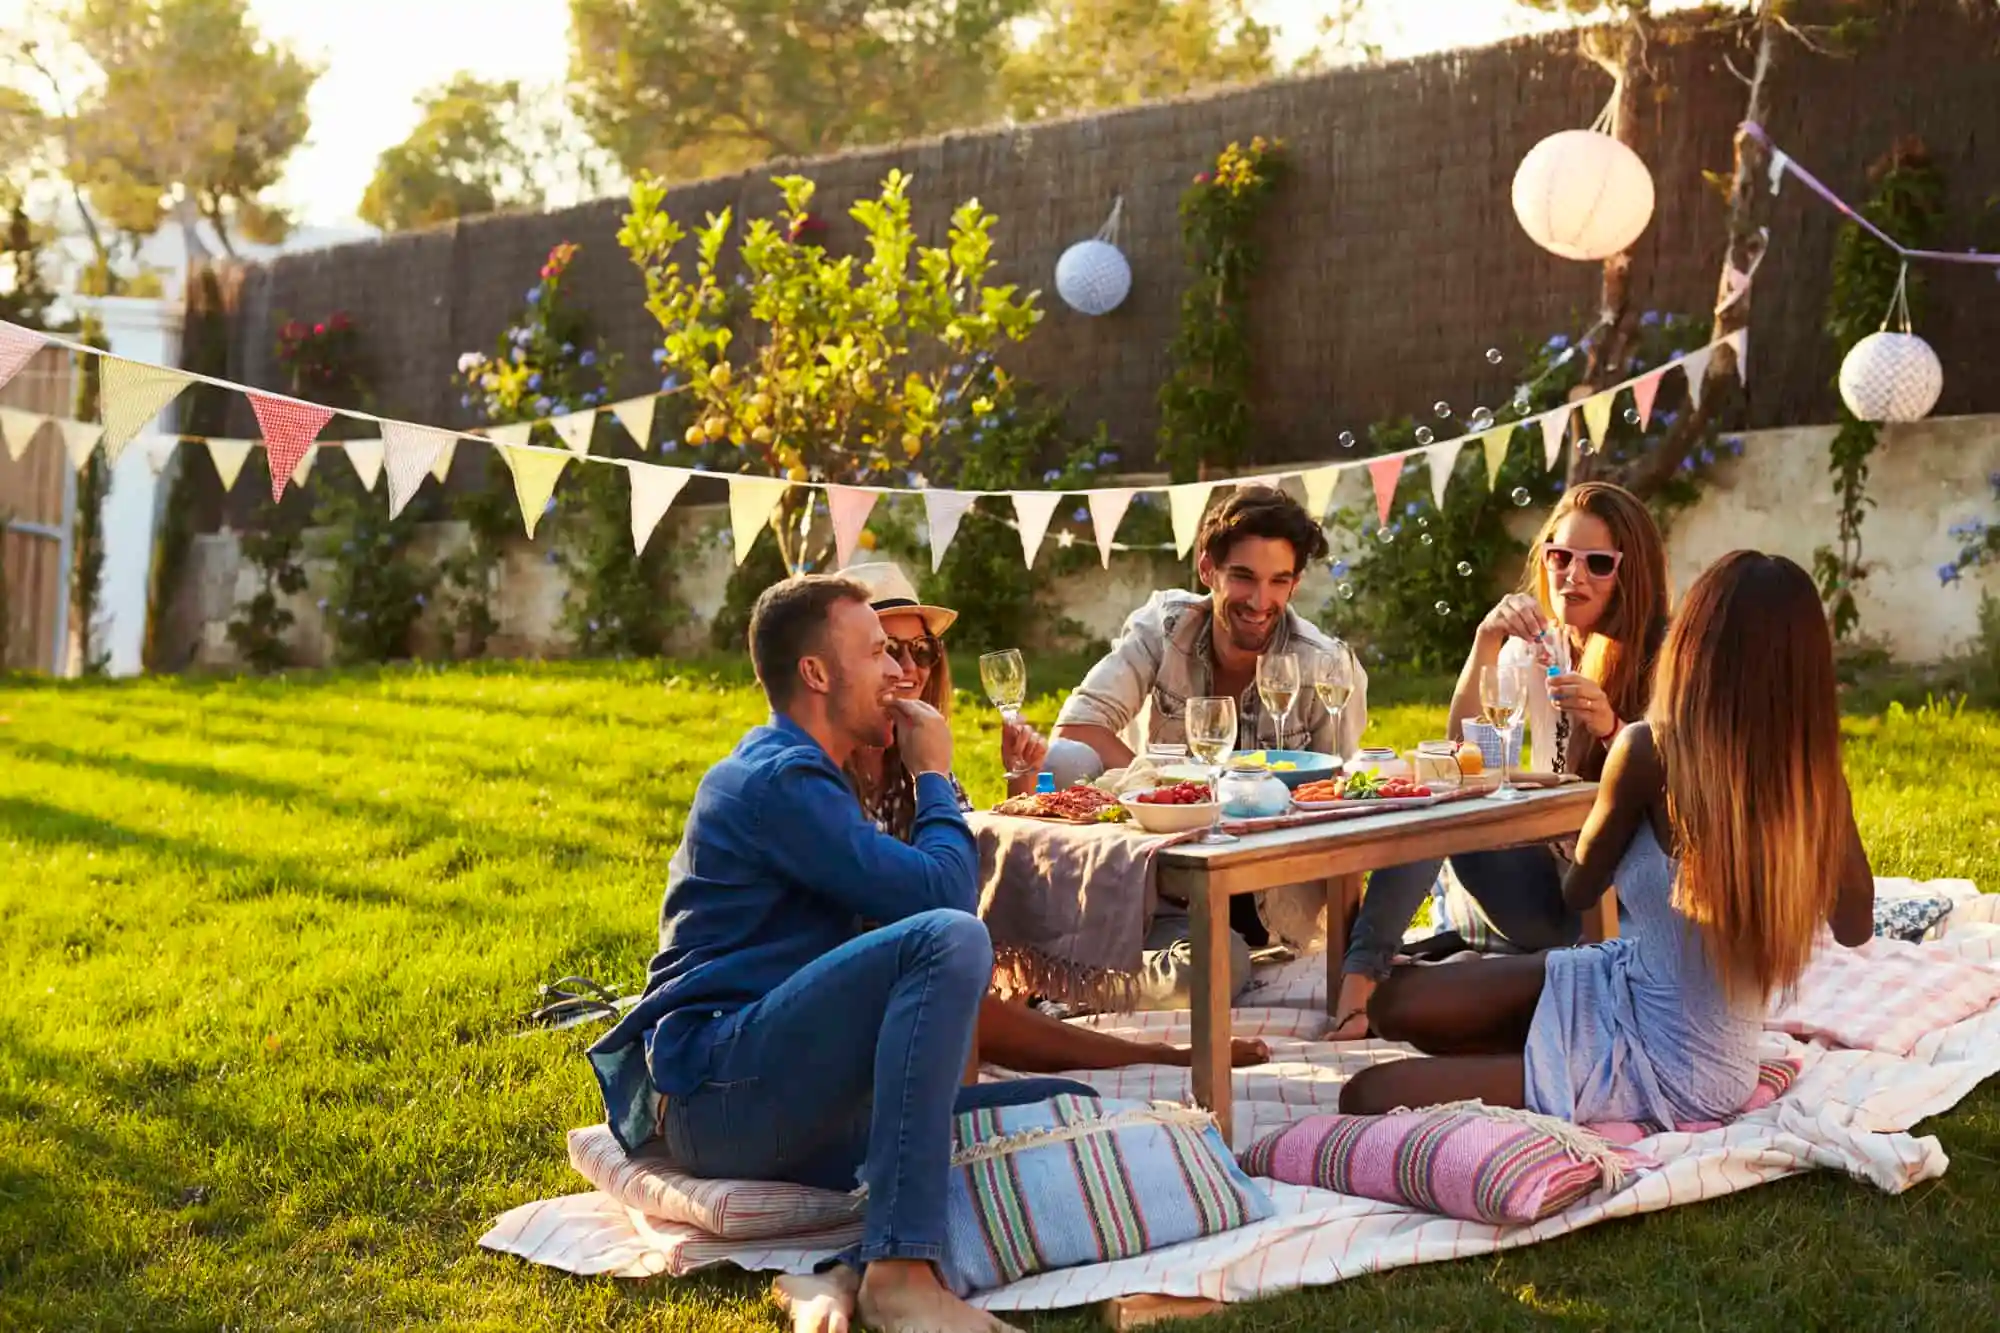 How To Throw A Backyard Party